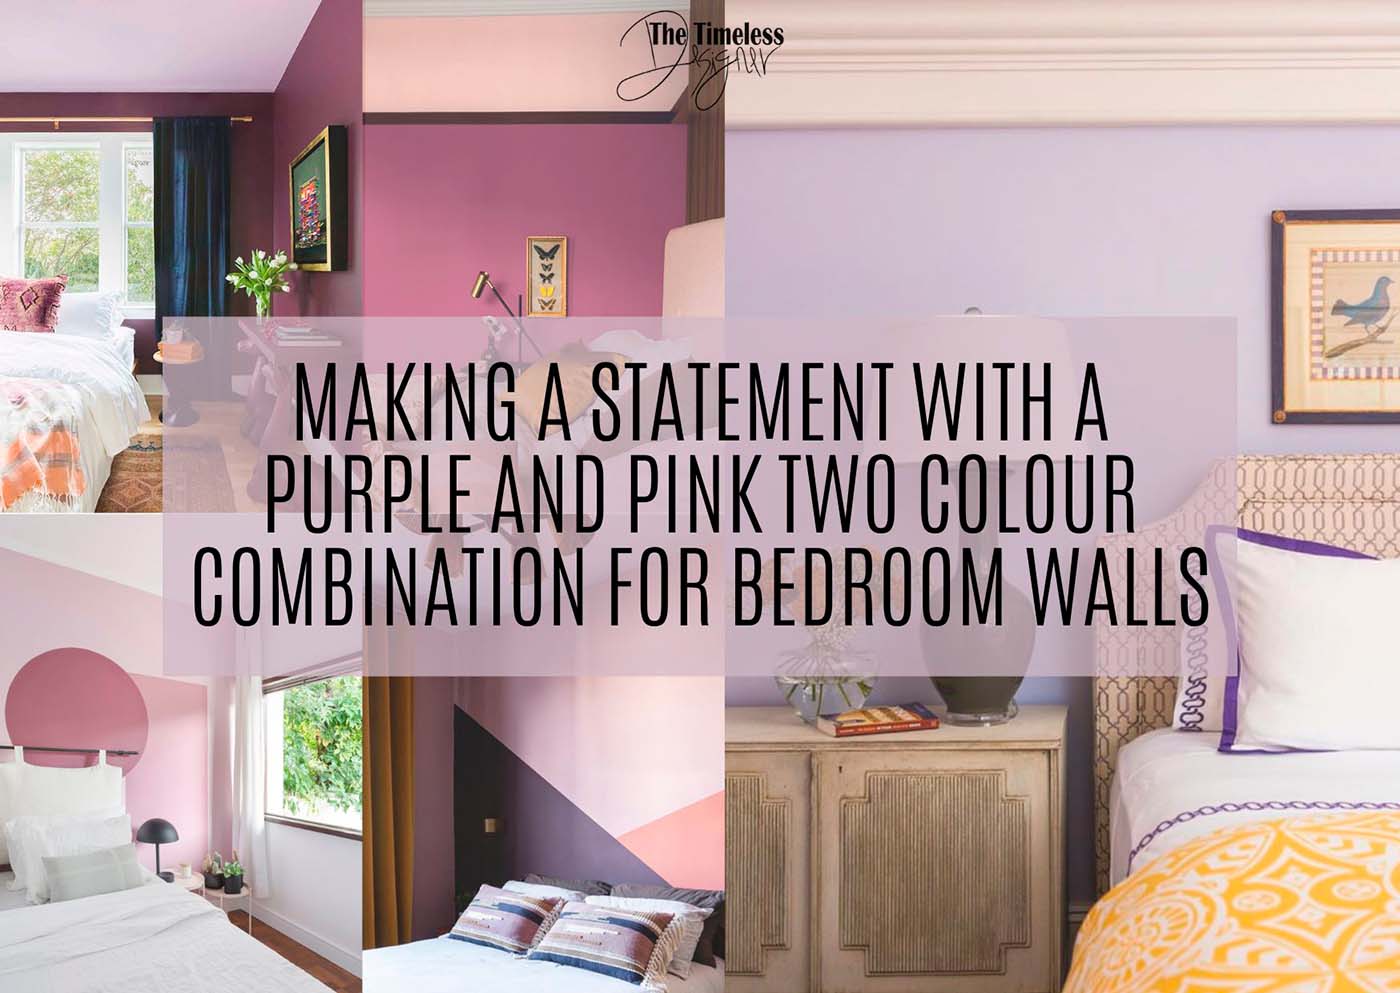 Making a Statement With a Purple And Pink Two Colour Combination for Bedroom Walls Image